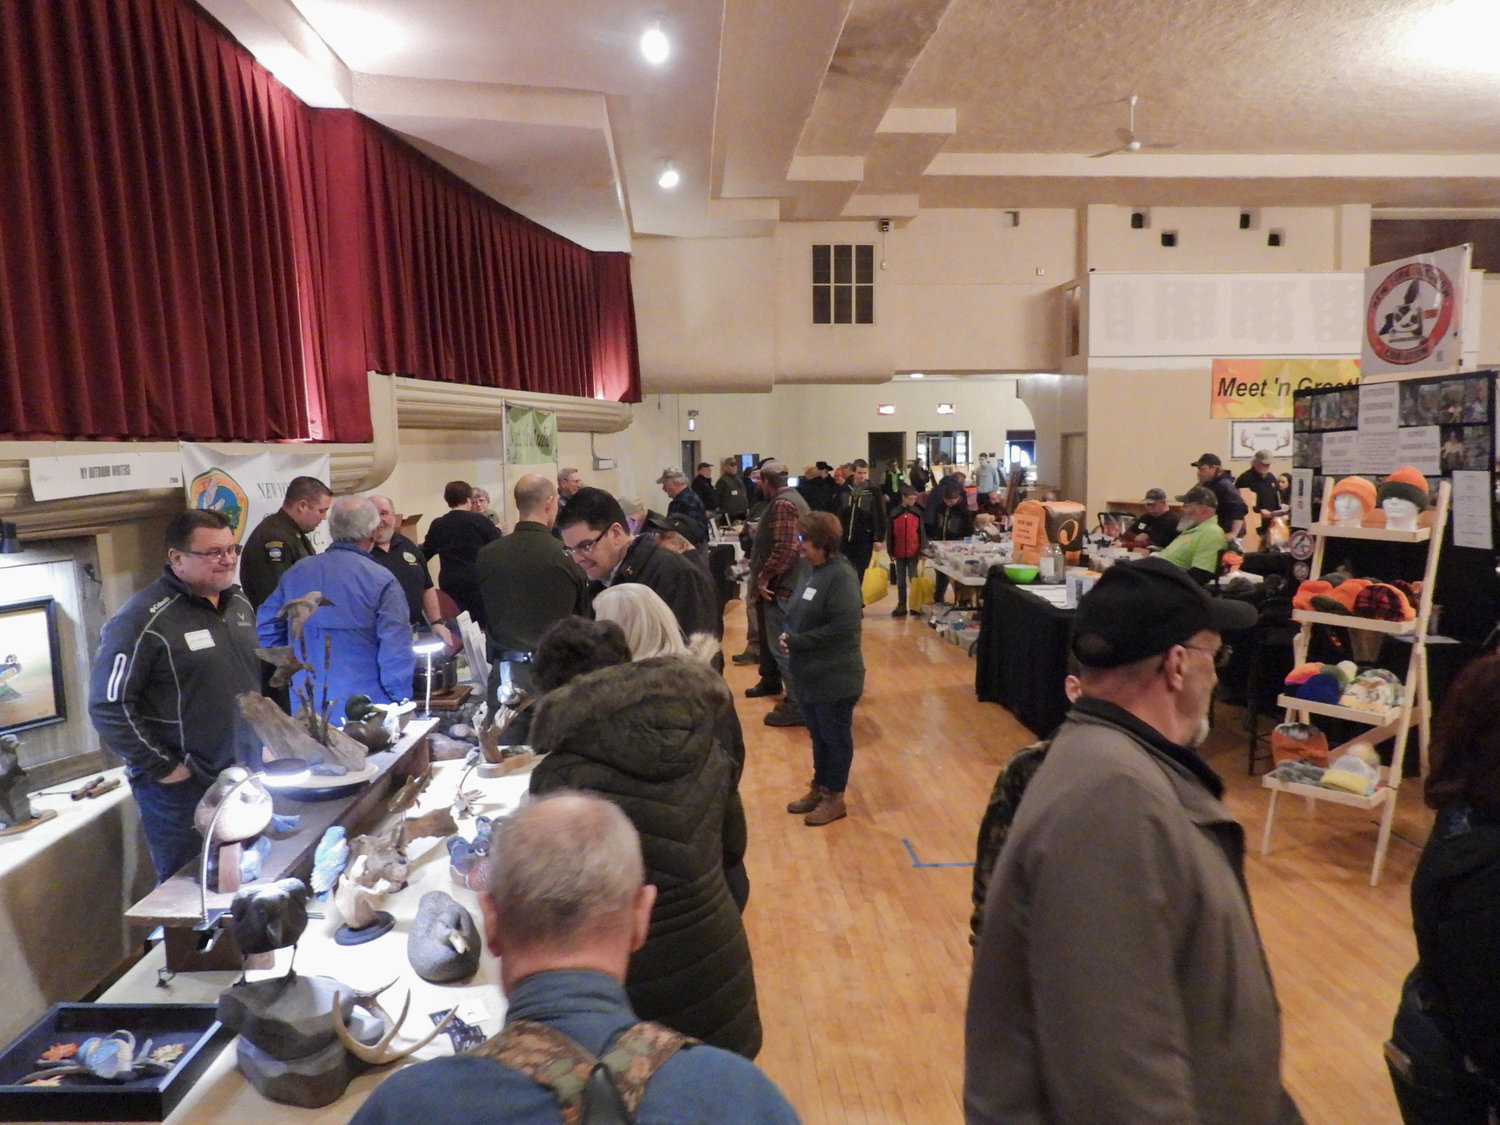 People attend the CNY Sportsman Show on Saturday, Feb. 4 at the Kallet Civic Center in Oneida